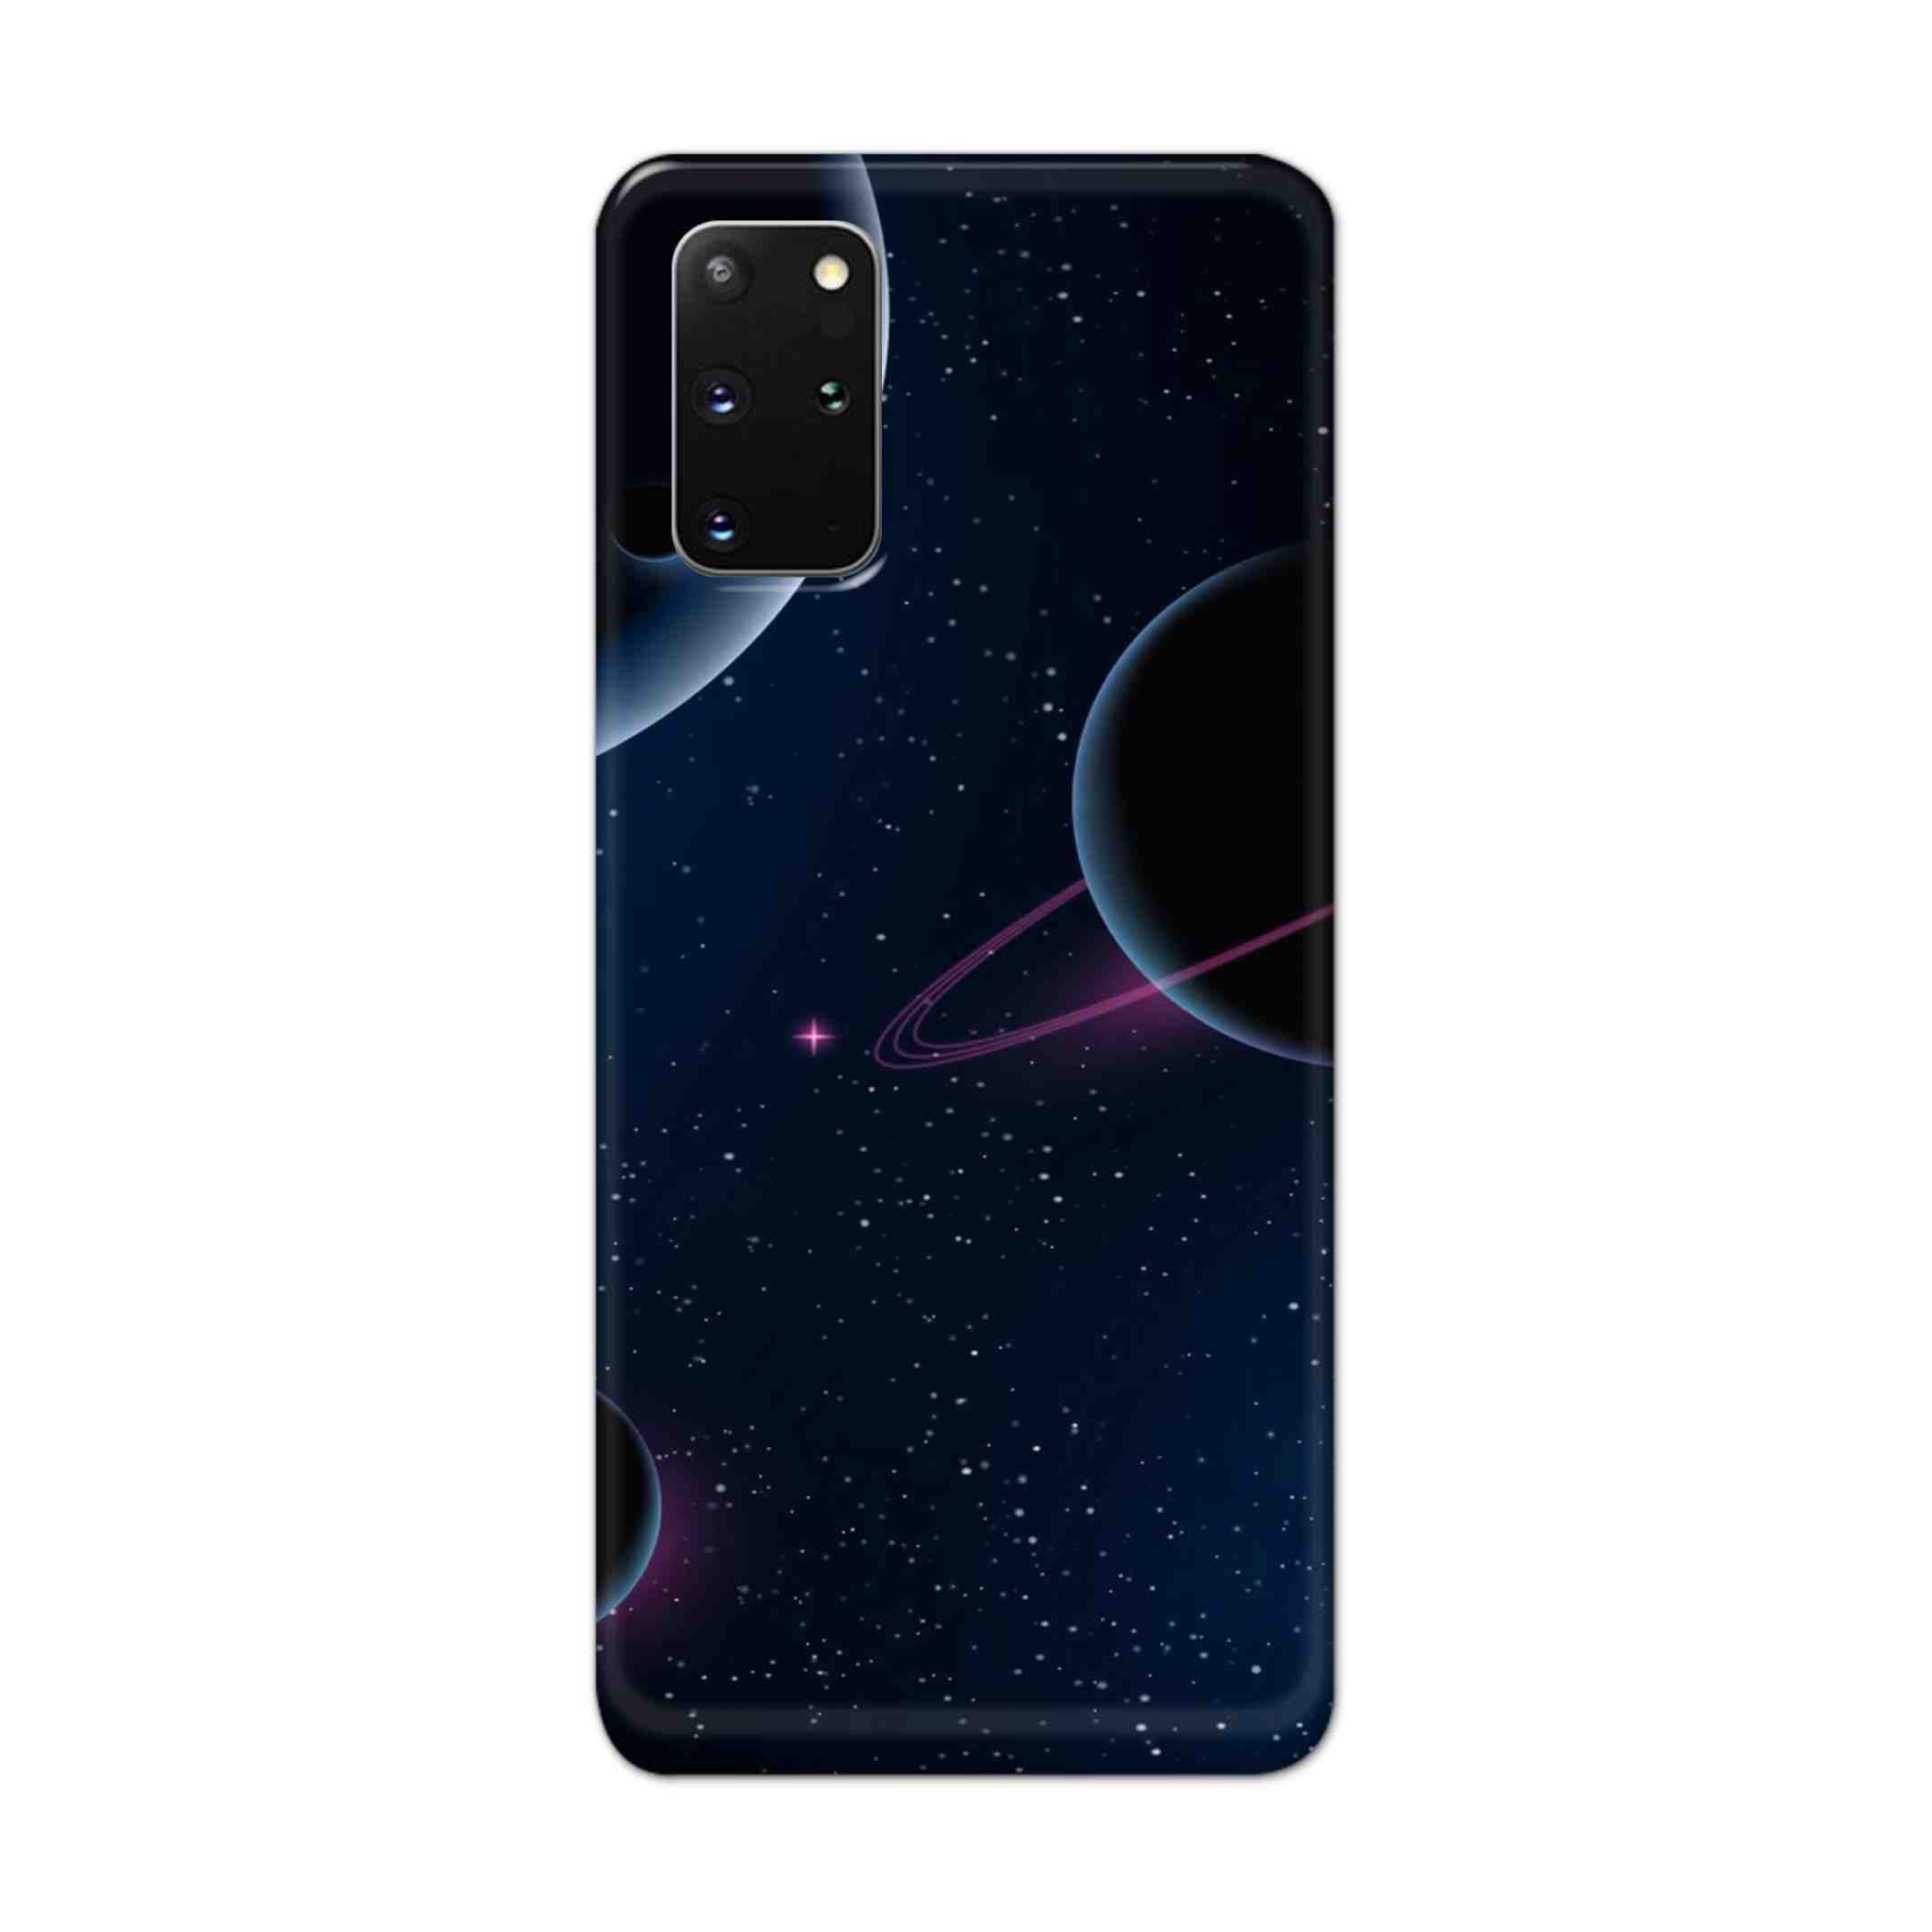 Buy Night Space Hard Back Mobile Phone Case Cover For Samsung Galaxy S20 Plus Online